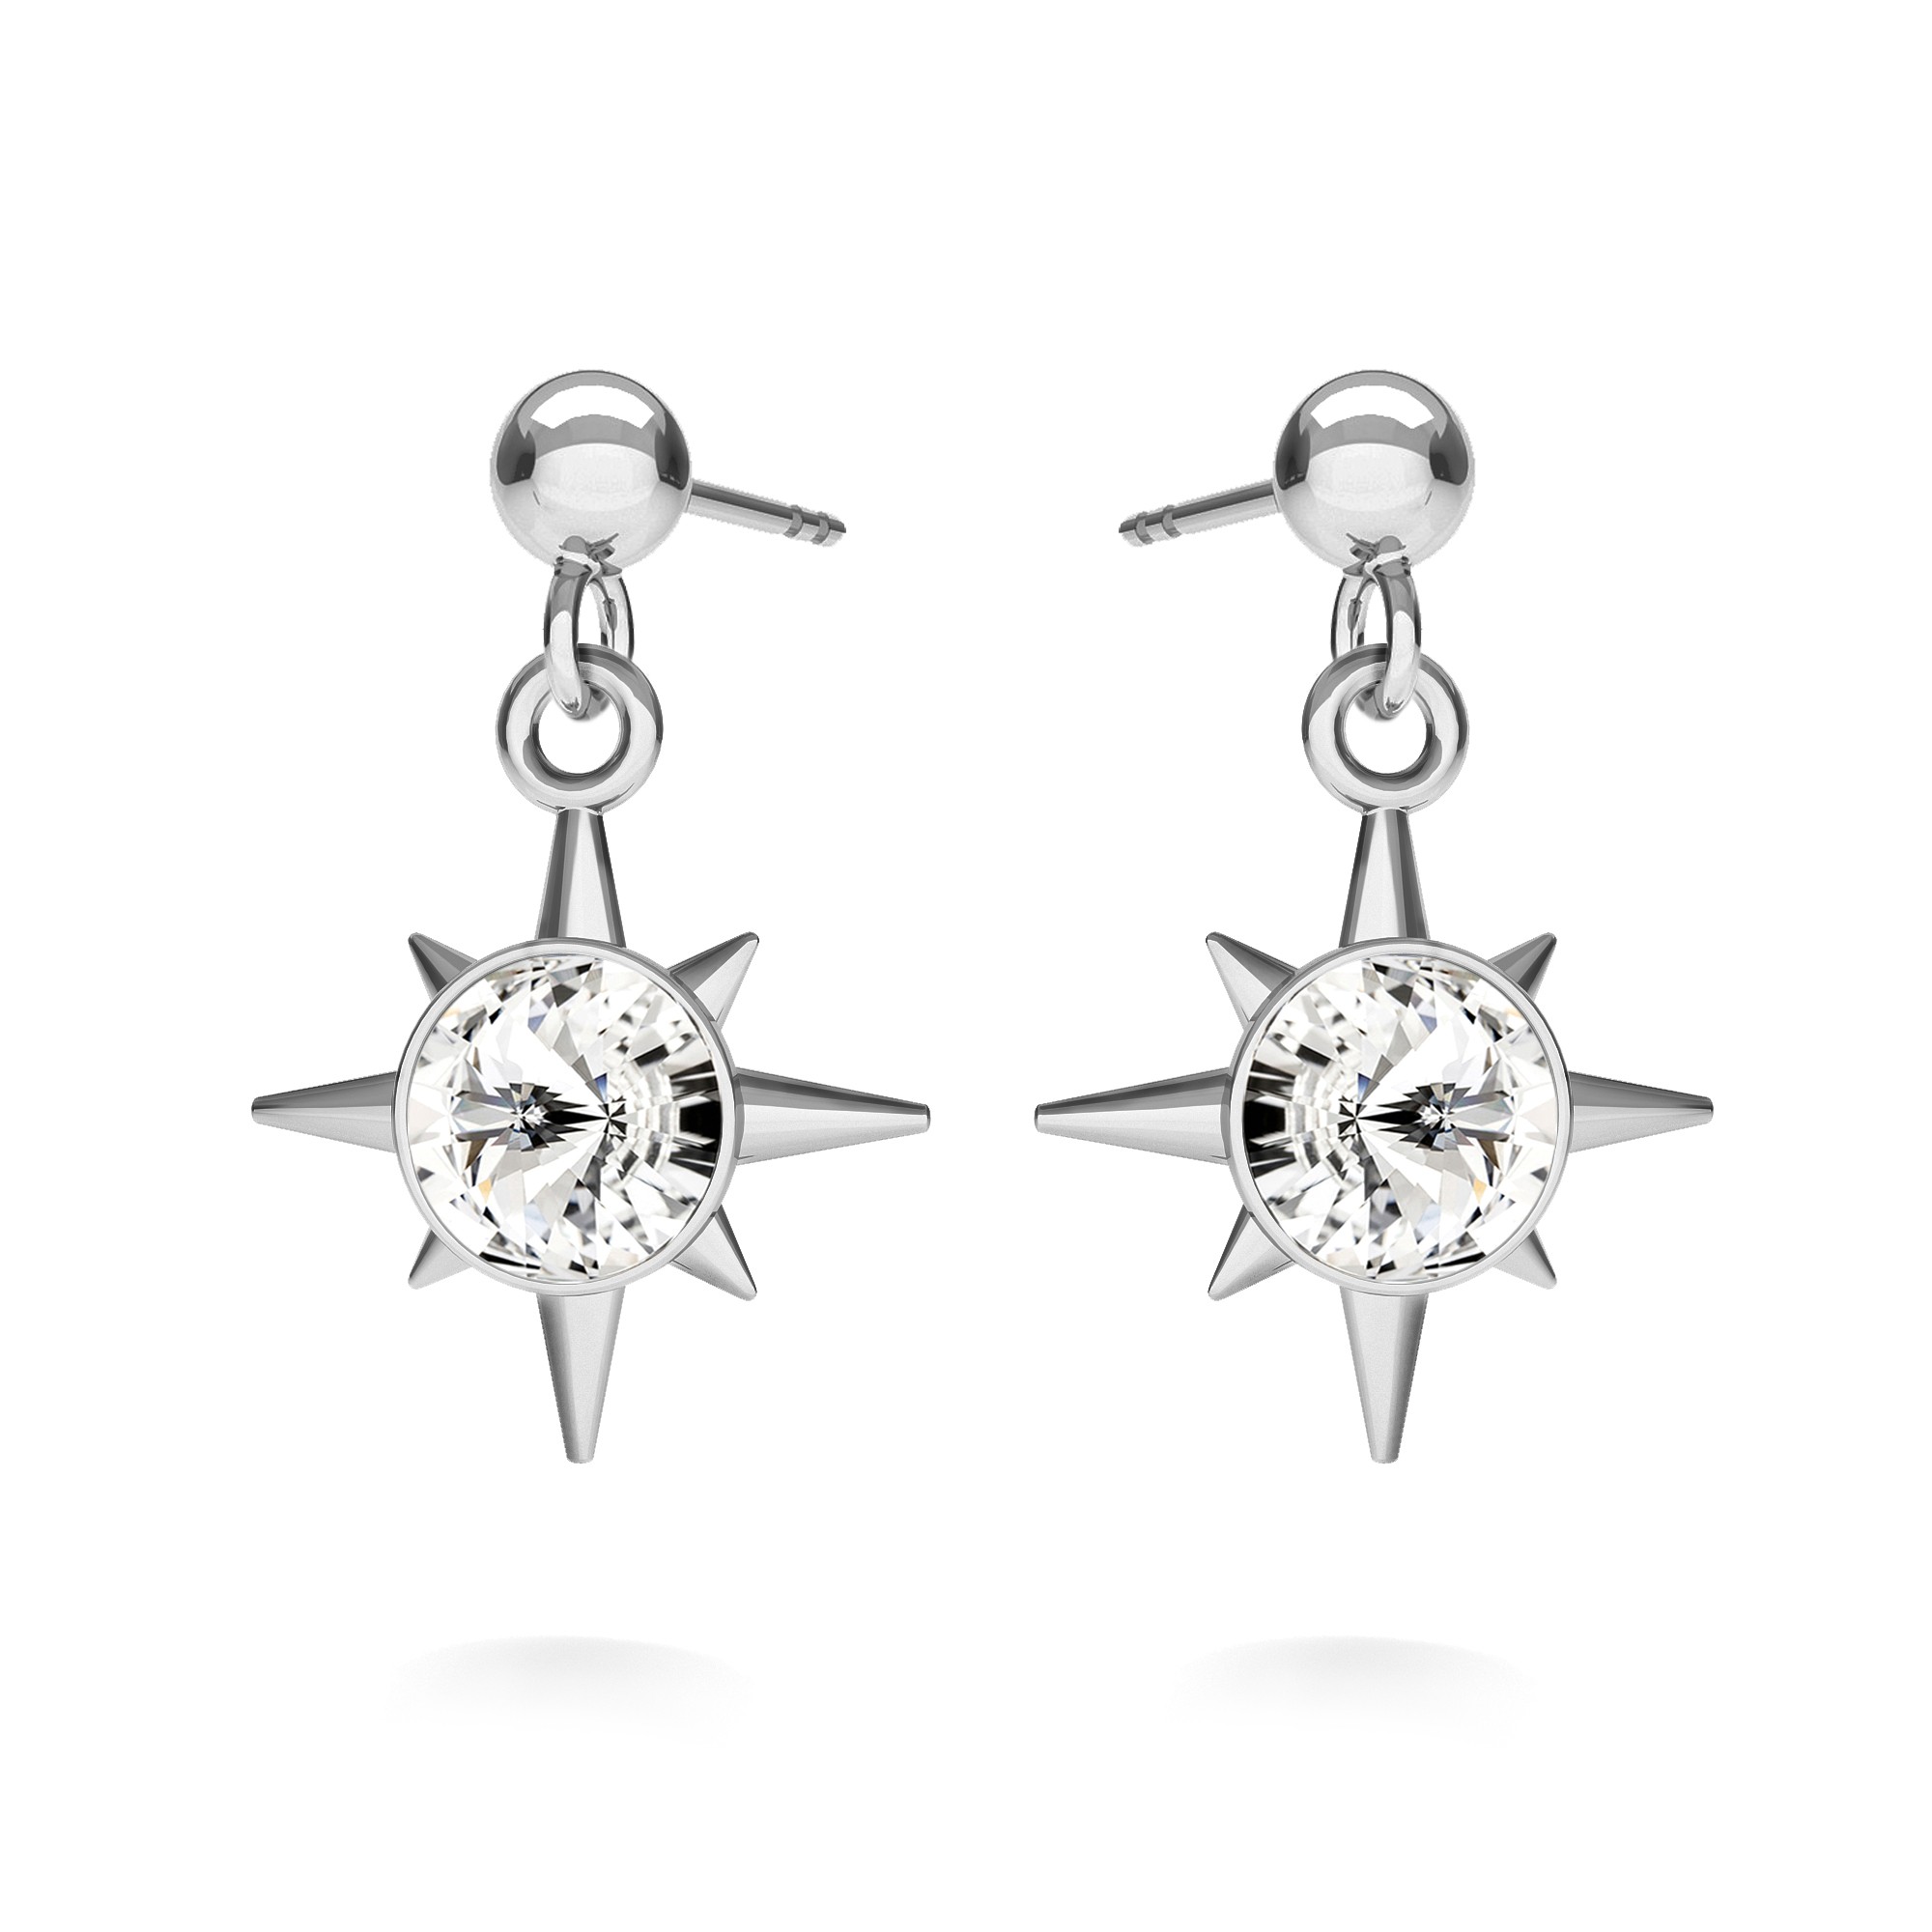 T°ra'vel'' earrings - star with crystal, sterling silver 925